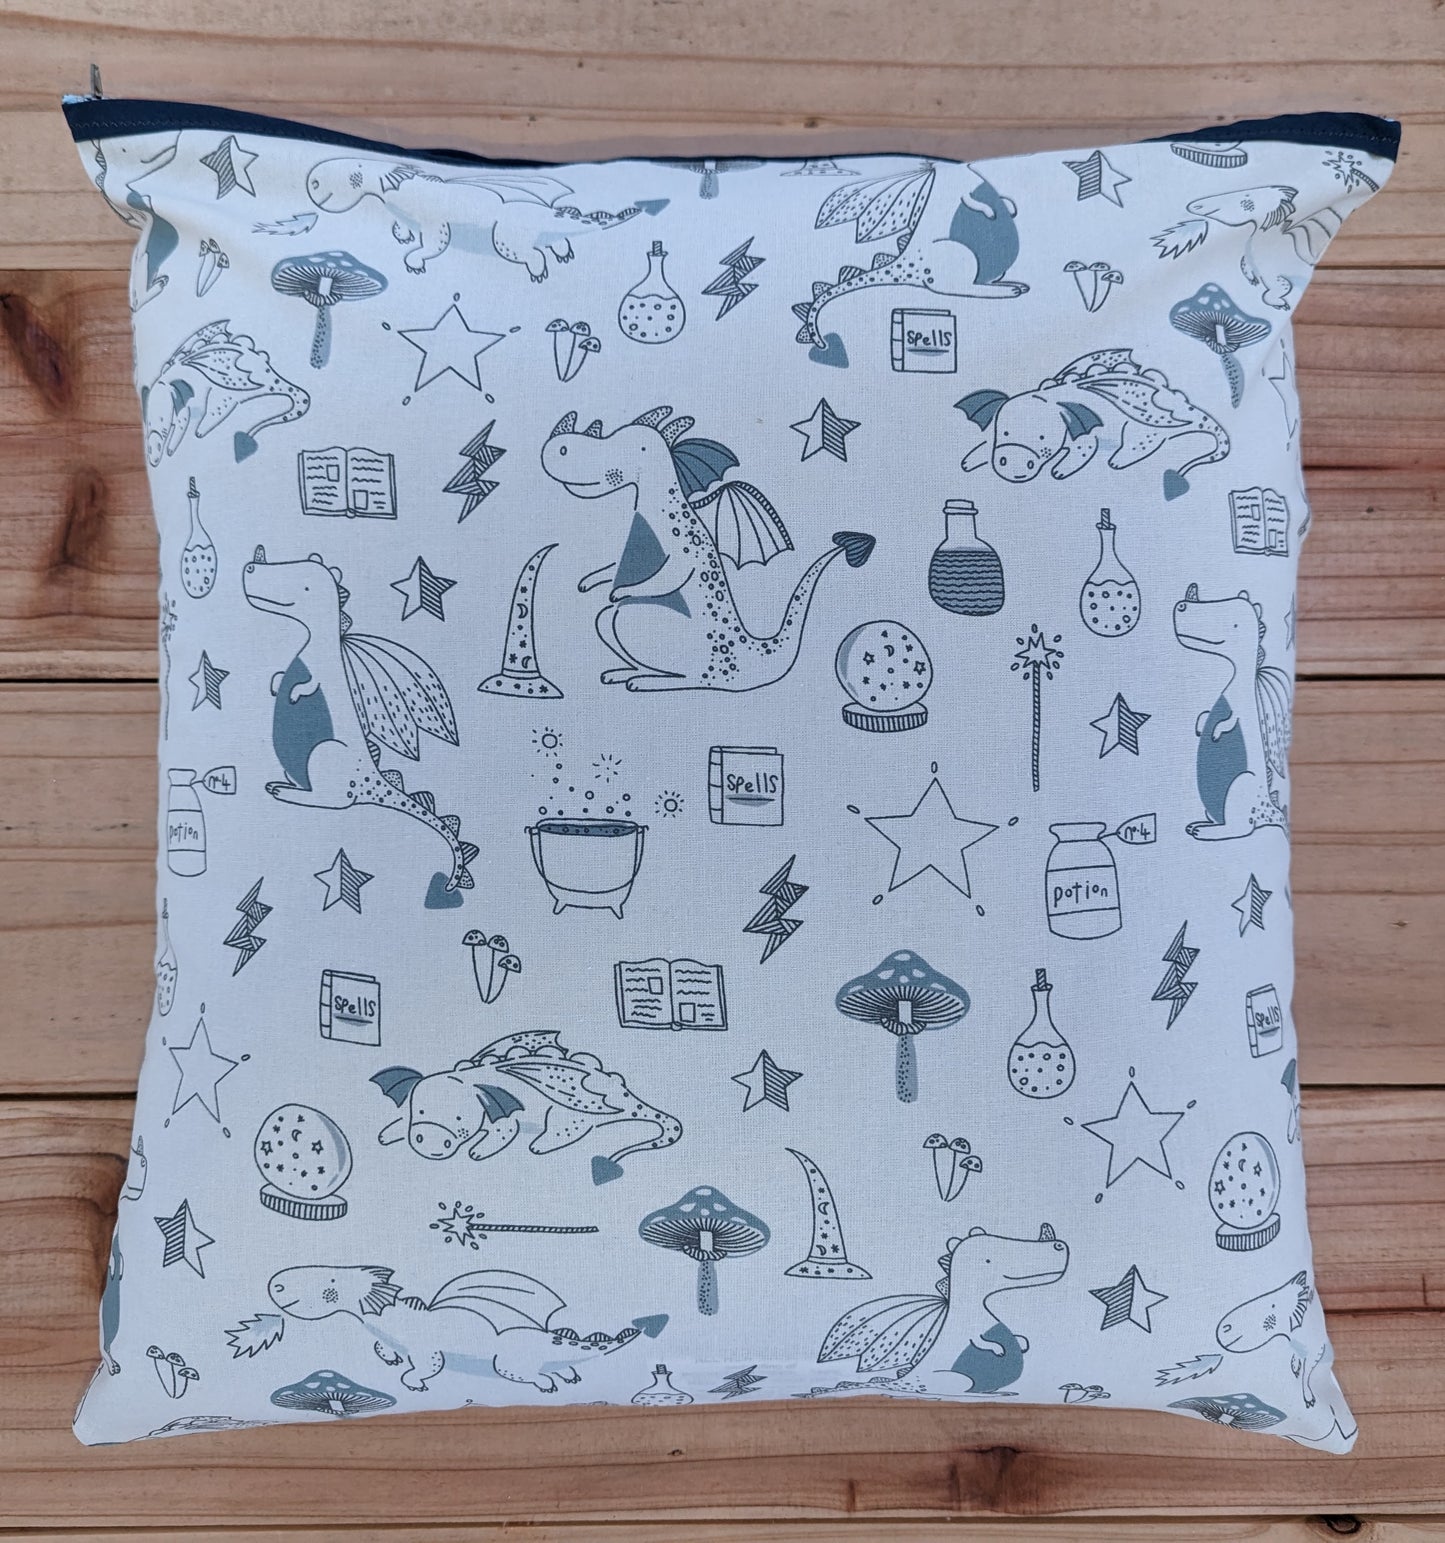 Reading is Magical Book Pillow